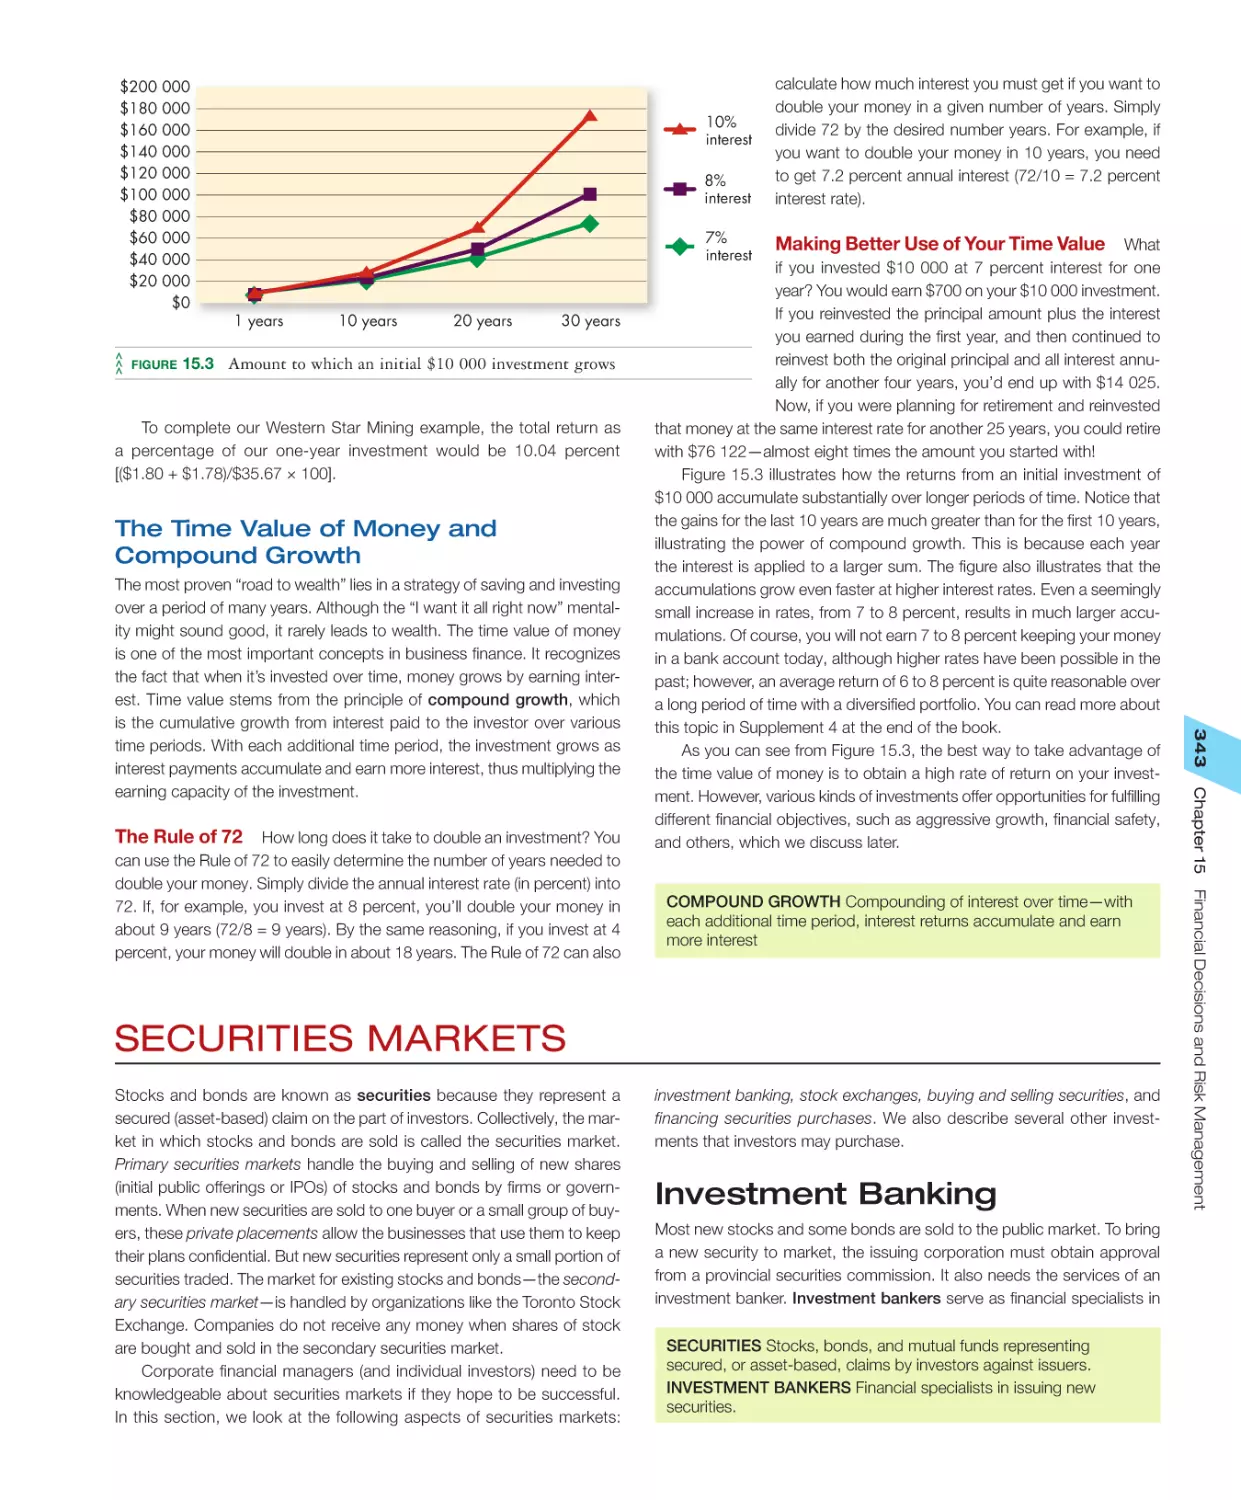 Securities Markets
Investment Banking